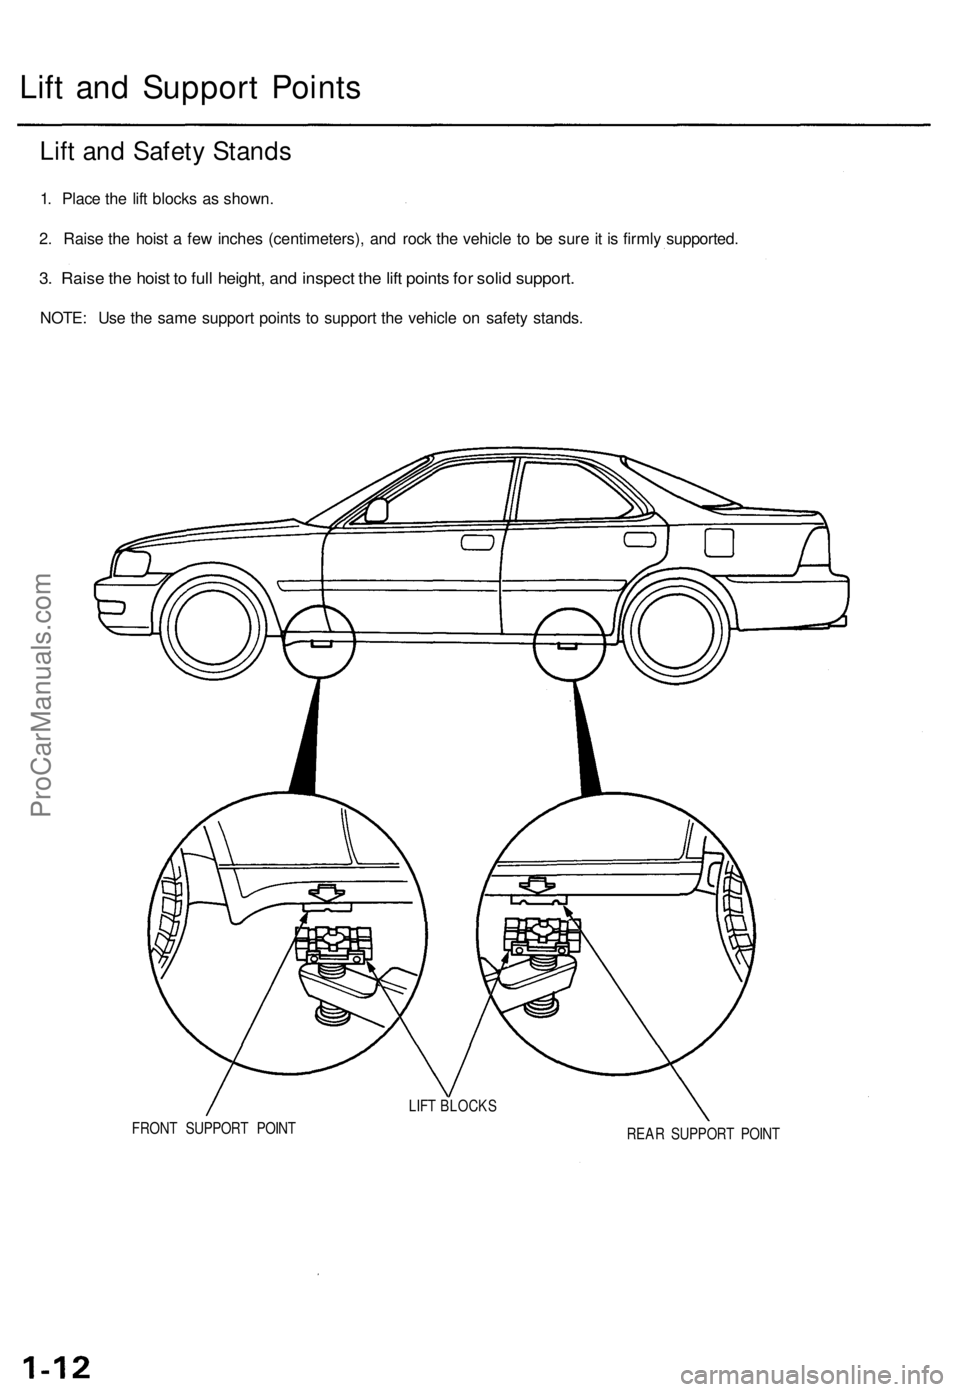 ACURA TL 1995  Service Repair Manual 
Lift and Support Points

FRONT SUPPORT POINT

REAR SUPPORT POINT
LIFT BLOCKS
Lift and Safety Stands

1. Place the lift blocks as shown.

2. Raise the hoist a few inches (centimeters), and rock the ve